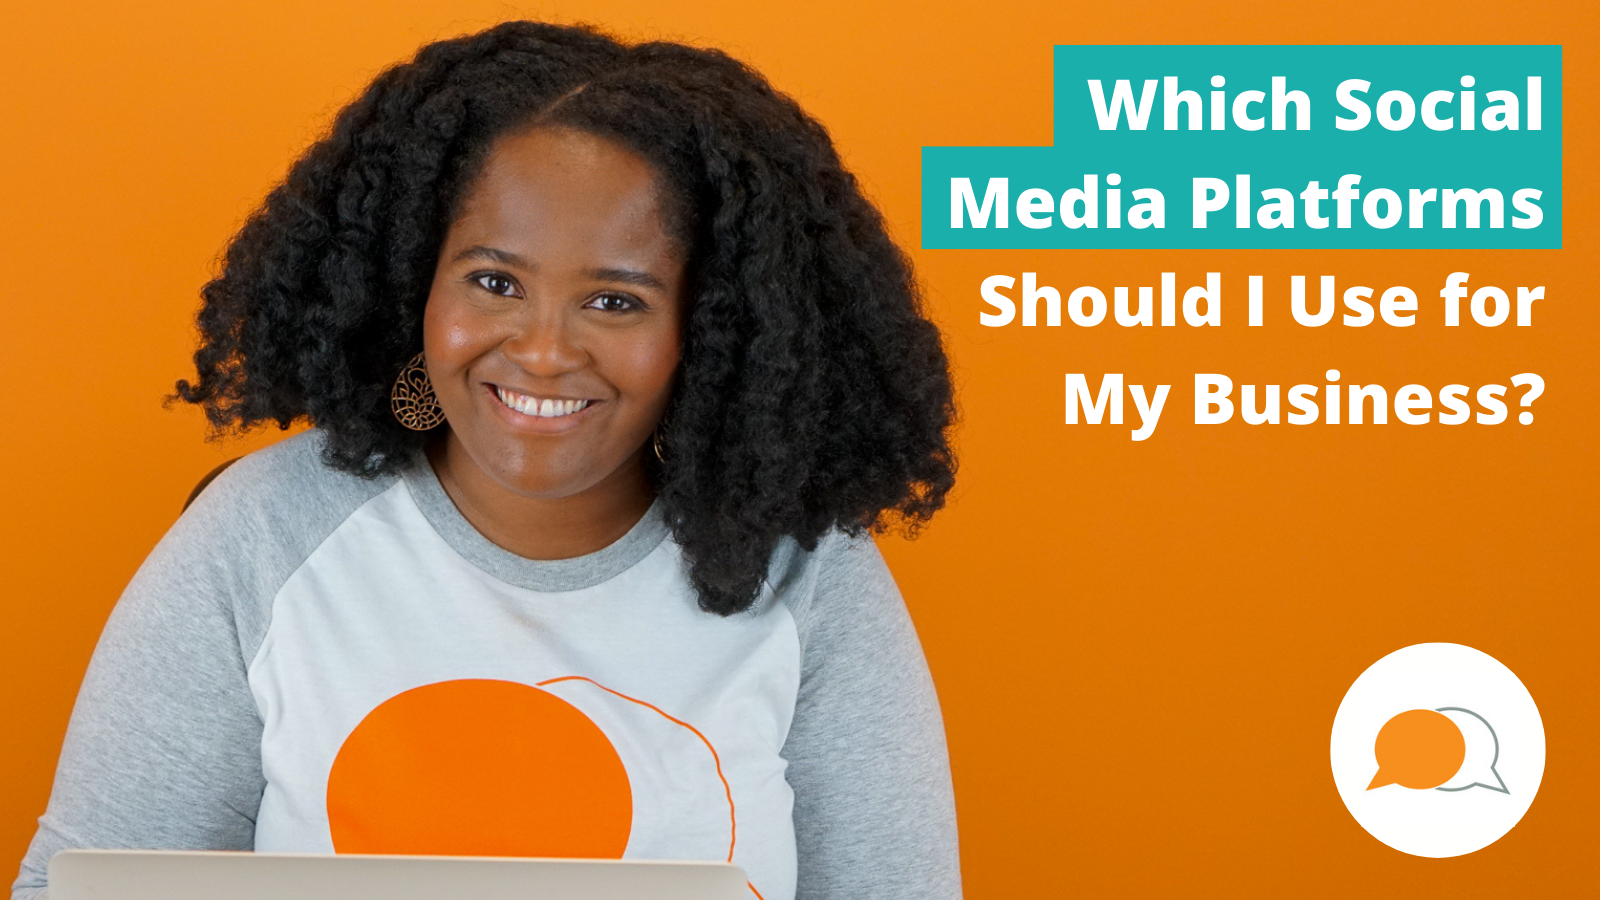 Which social media platforms should I use for my business?